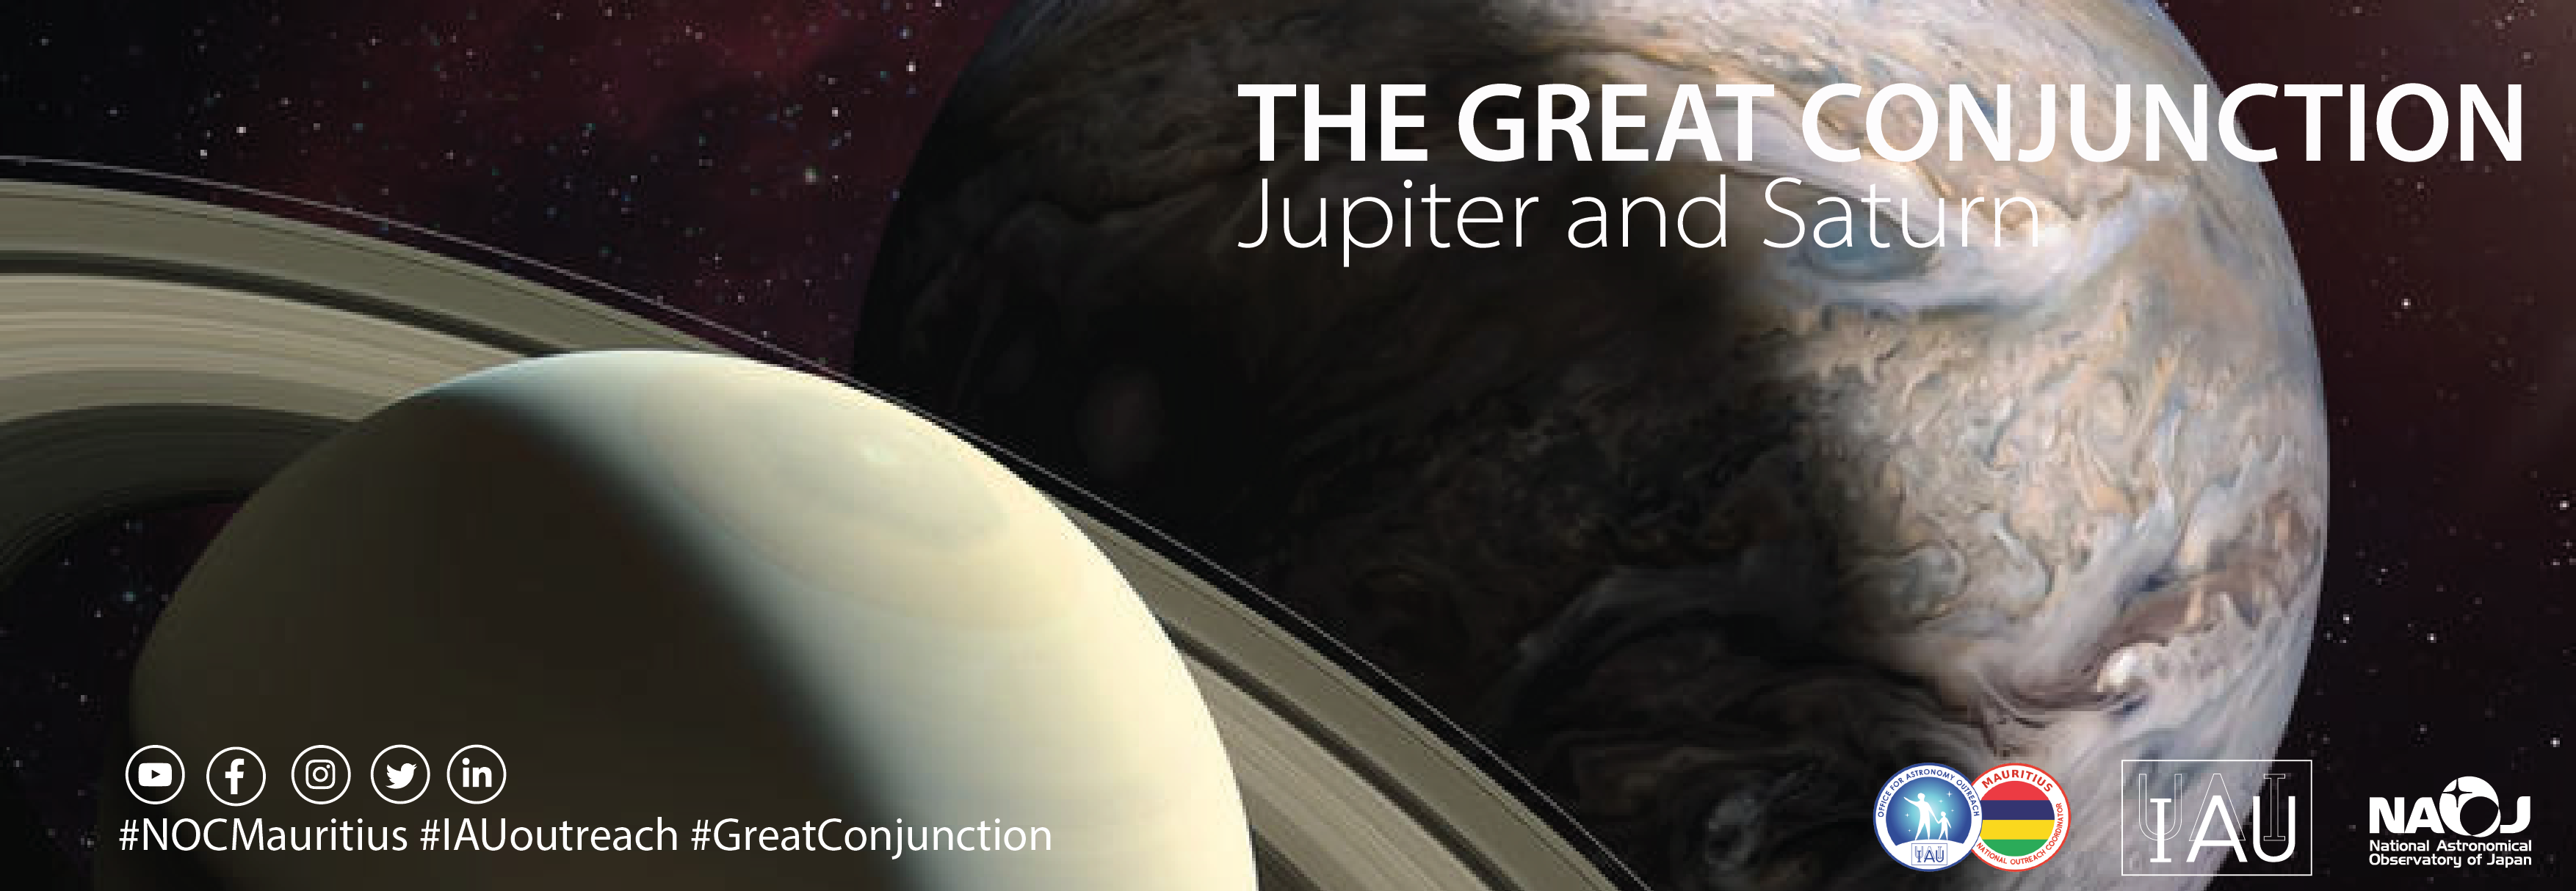 The Great Conjunction 2020 - Announcement